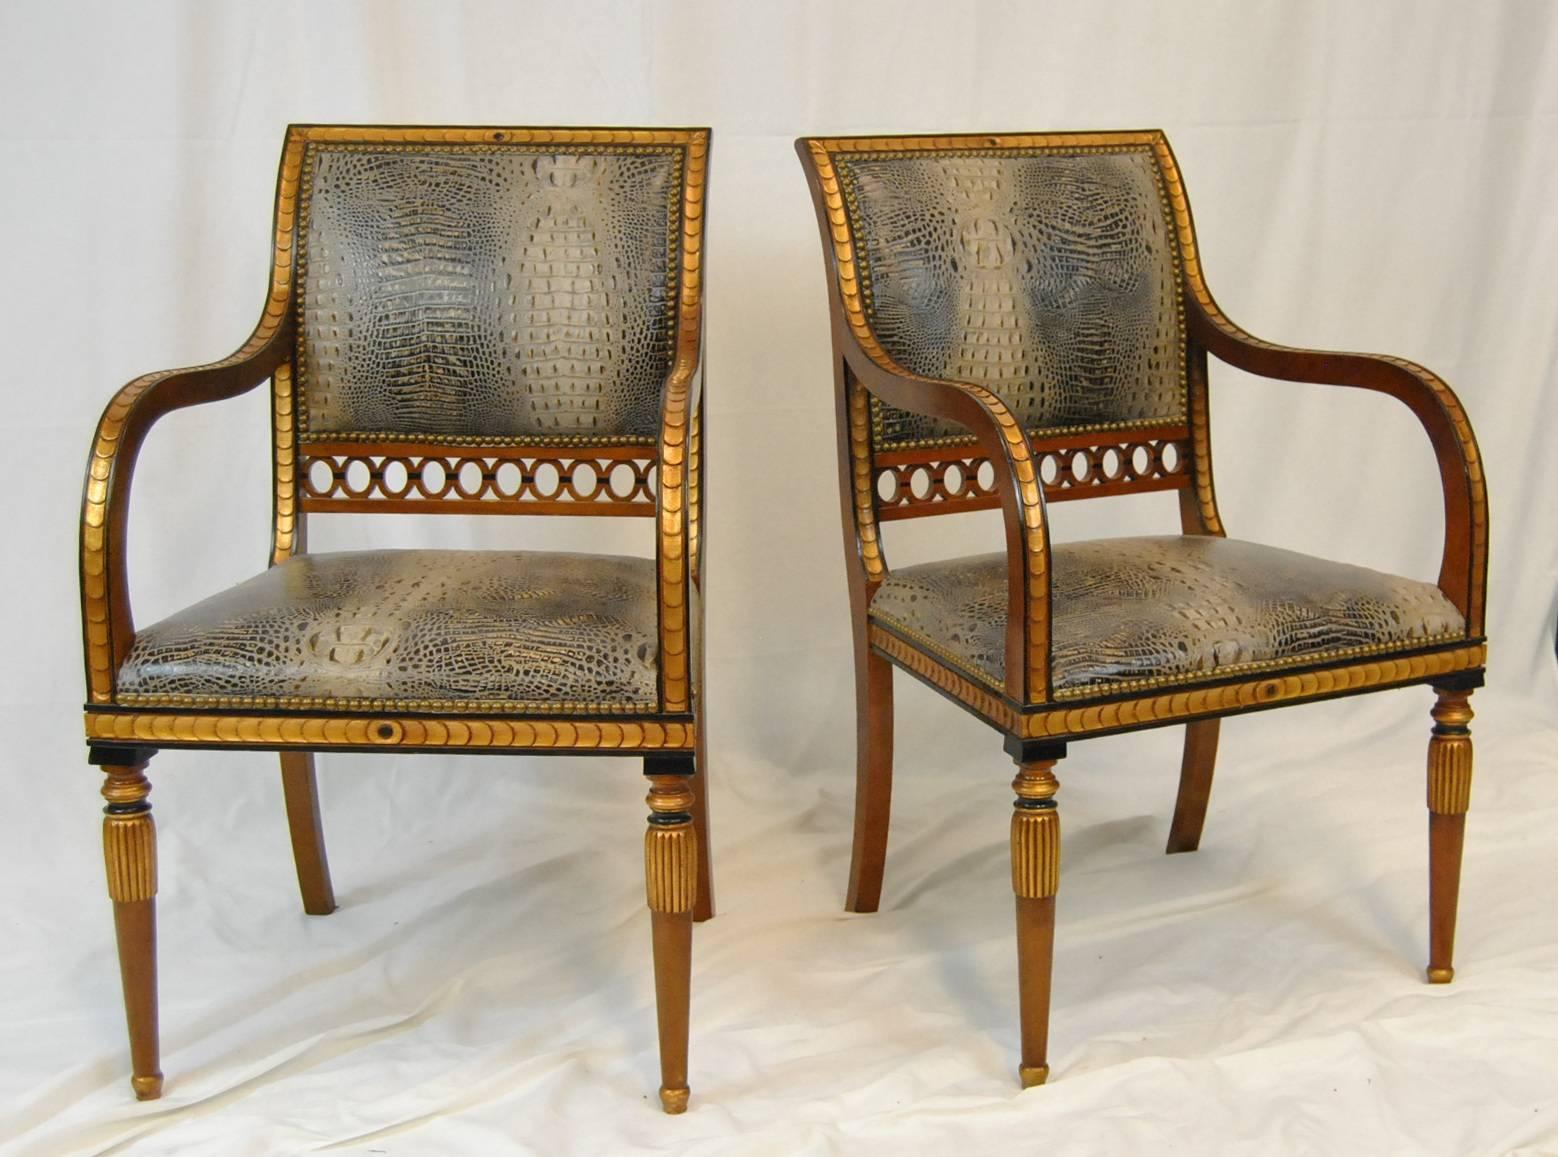 A great pair of Regency style armchairs by Whittemore Sherrill. The chairs feature crocodile upholstery. Gold scale like carvings accent the back, arms and skirt of each chair. Tapering fluted legs with black accents complete the look. This unusual